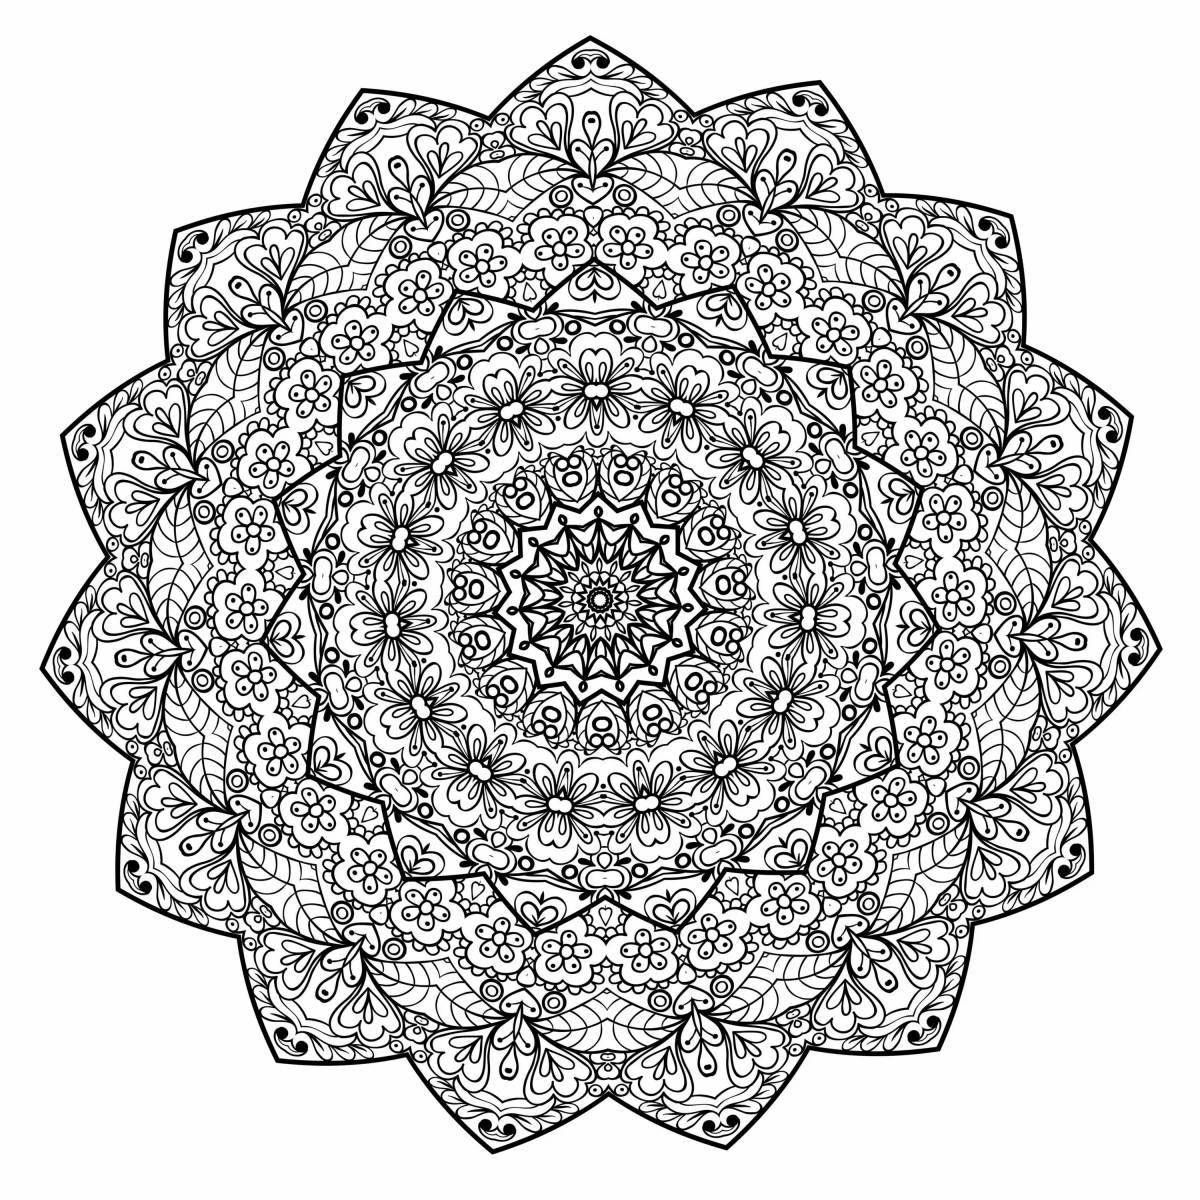 Glitter coloring mandala of wealth and prosperity